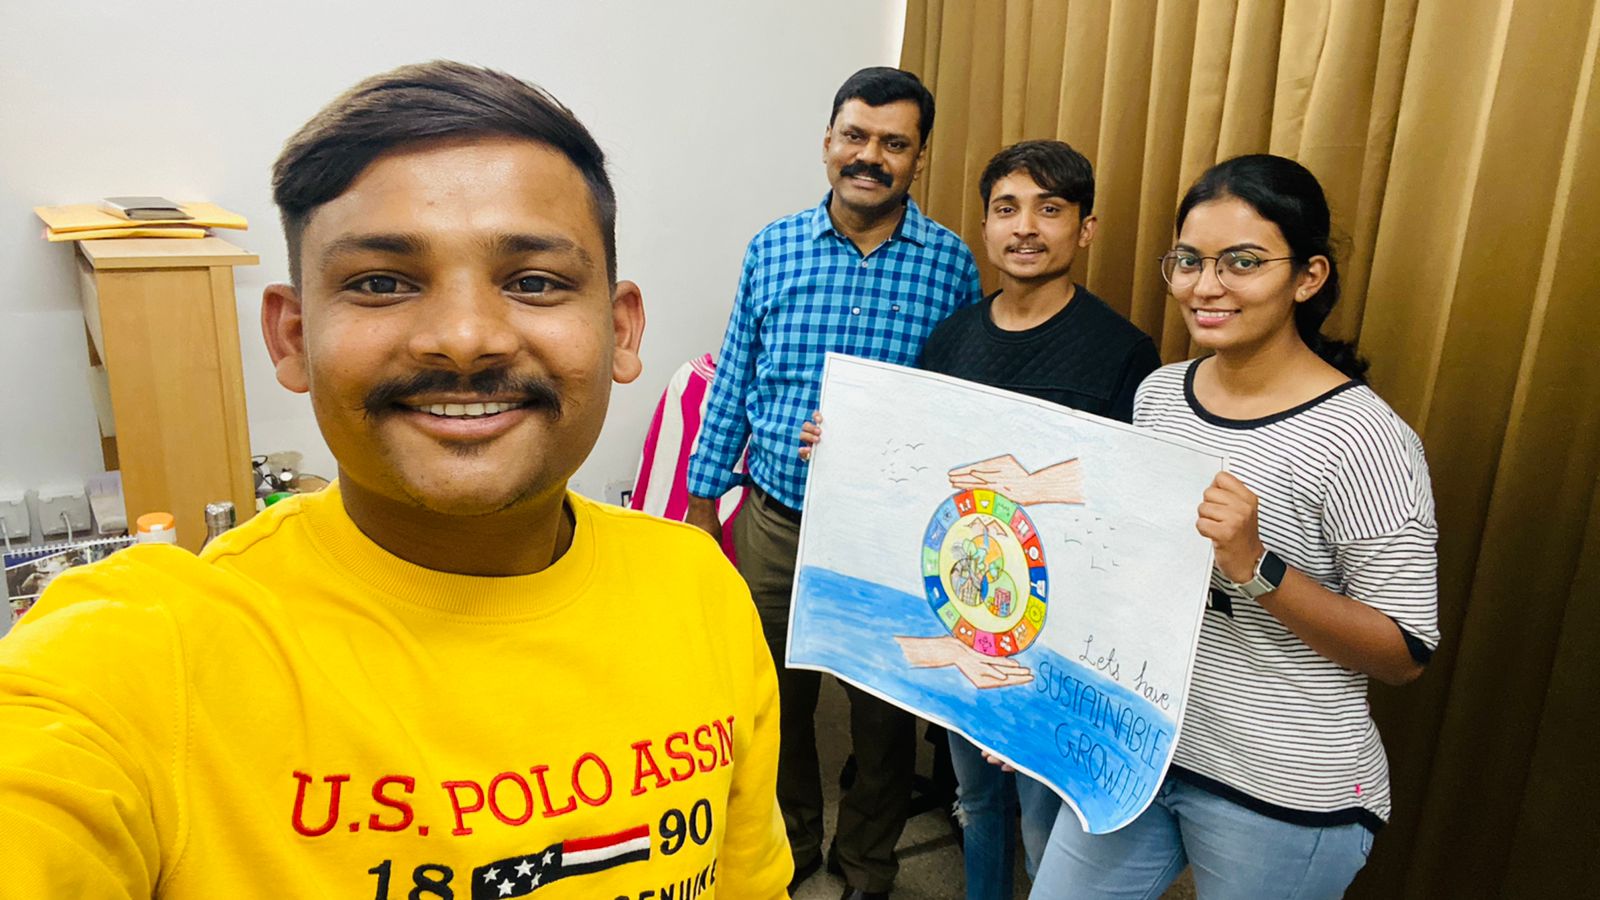 On the Spot painting Competition on the Occasion of 'National Science Day' 2022
[ 1st Prize : Dhruti Soni and Zeel Patel ] 